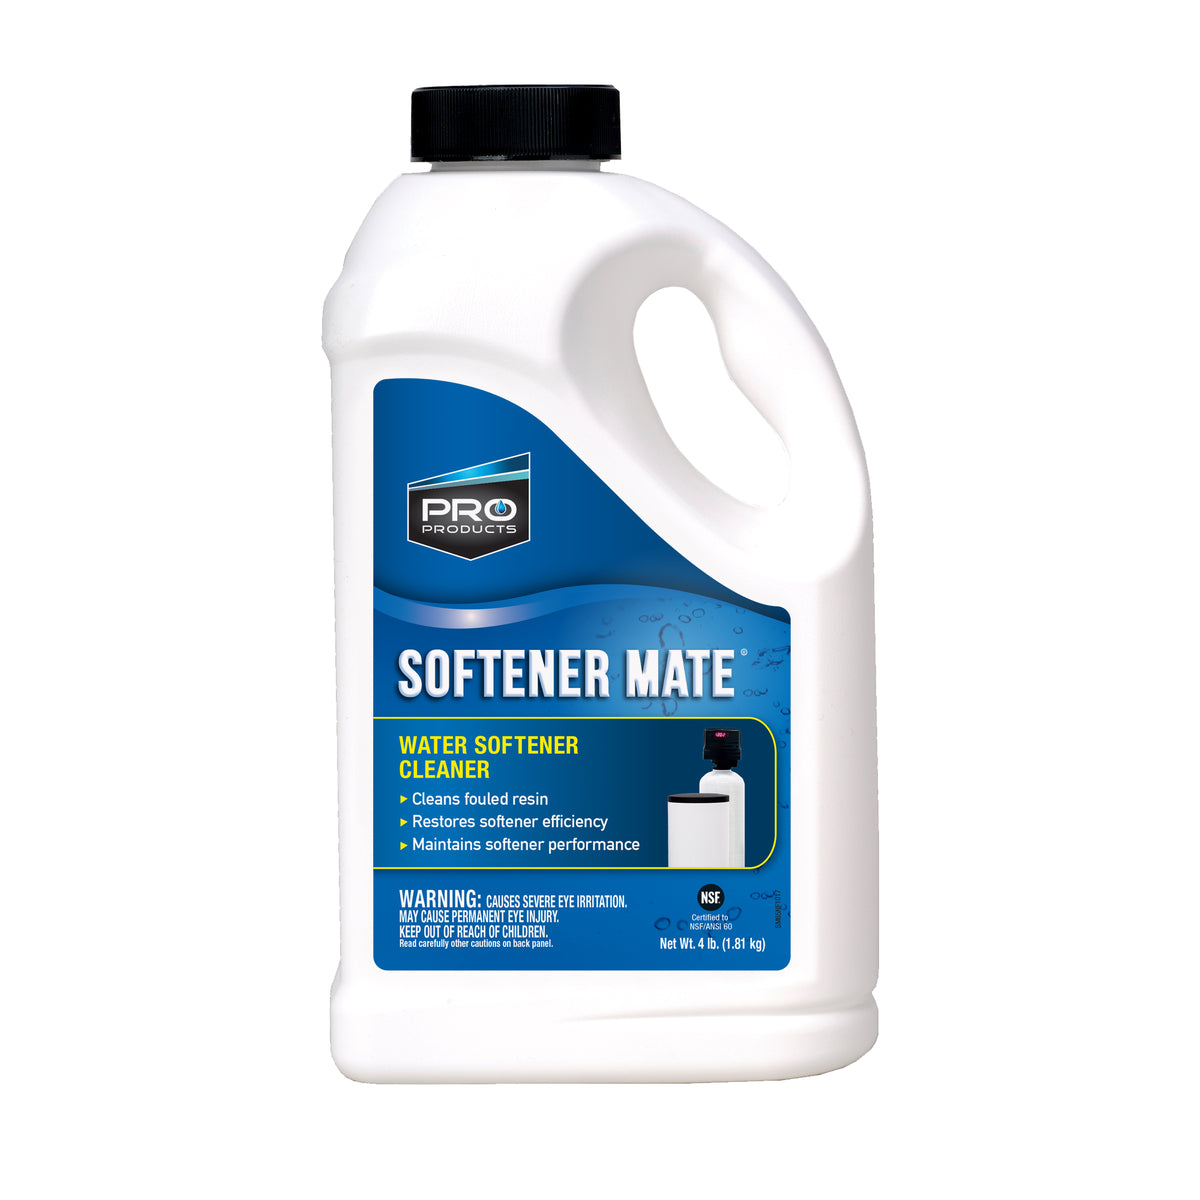 Pro Products Softener Mate SM65N City Water Softener Cleaner, 4 Pounds